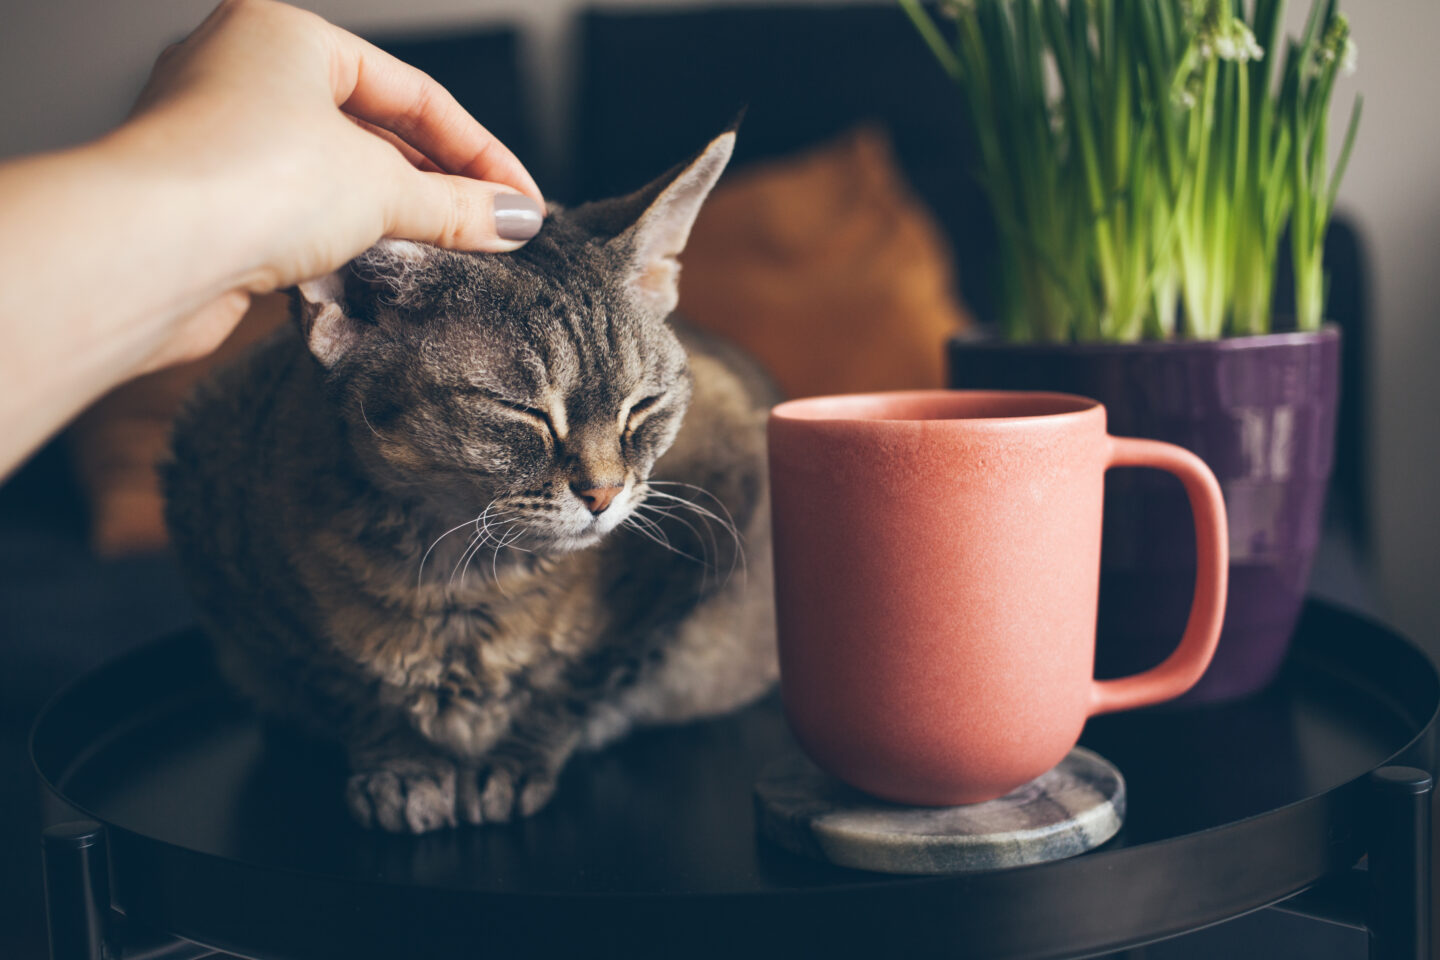 owner-petting-a-cat-beside-a-cup